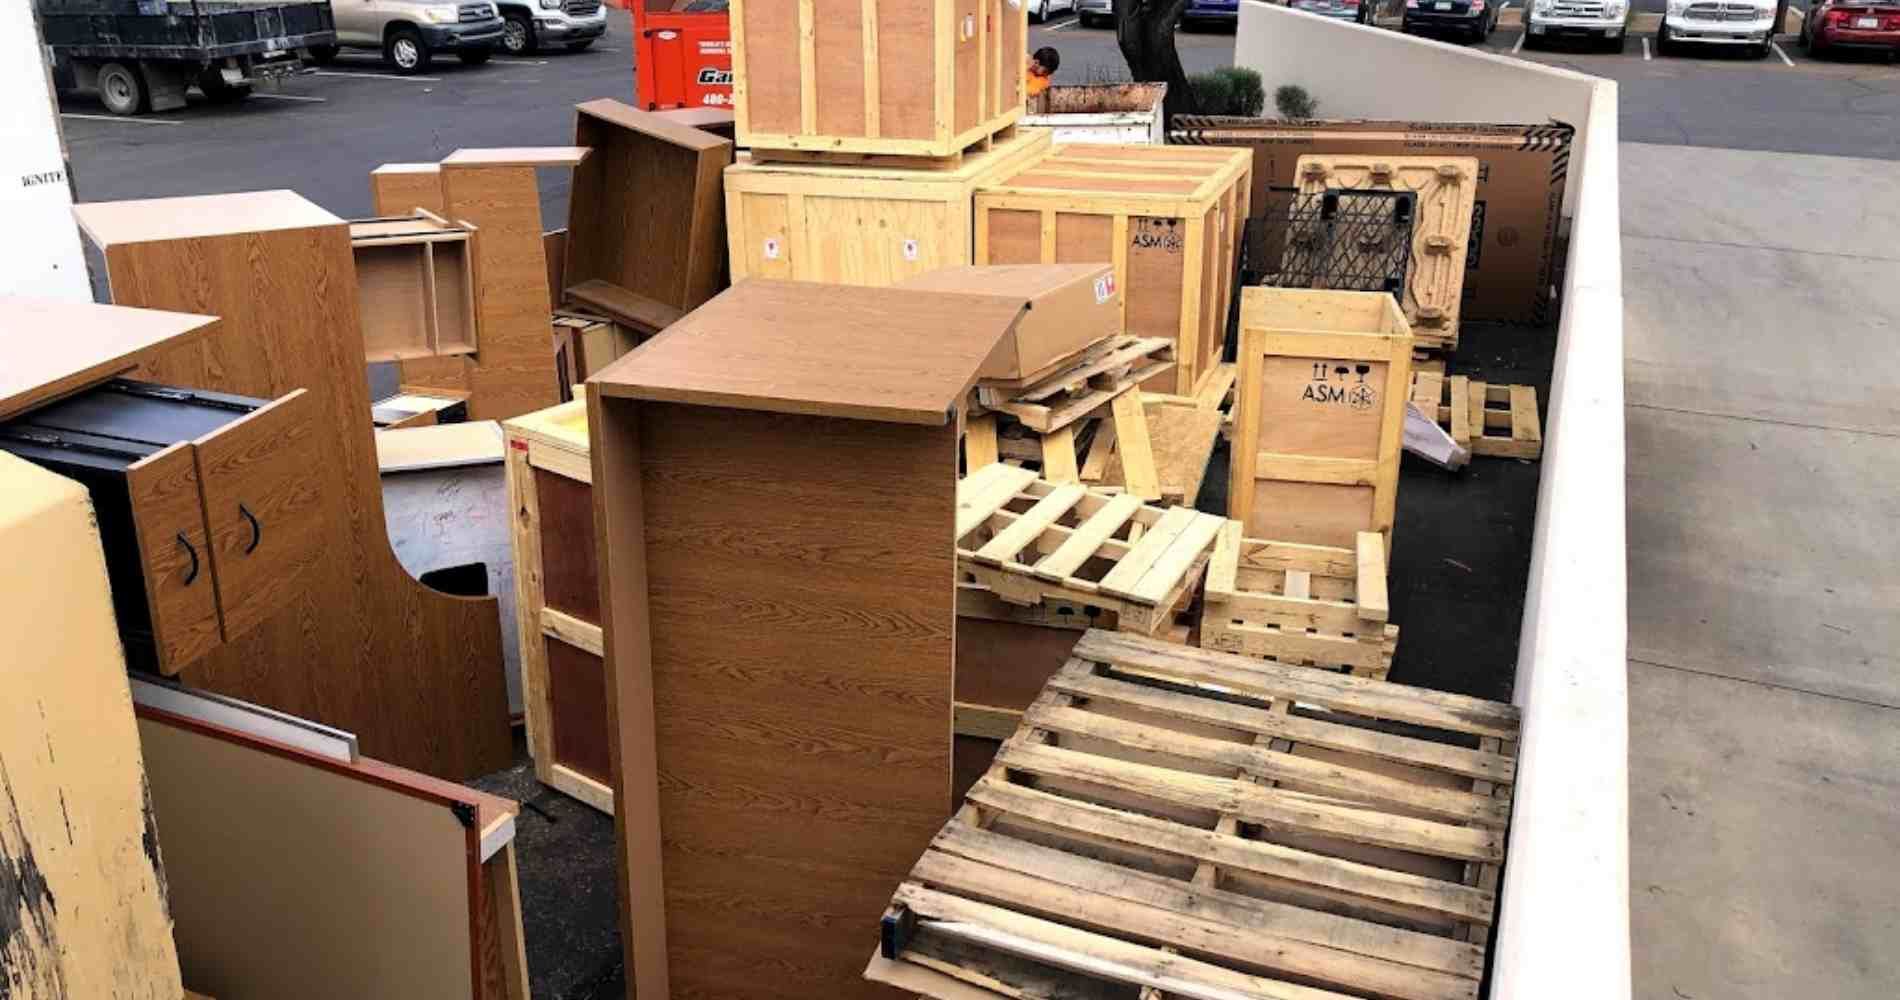 #1 for Pallet Disposal in Gilbert, AZ With Over 1200 5-Star Reviews!